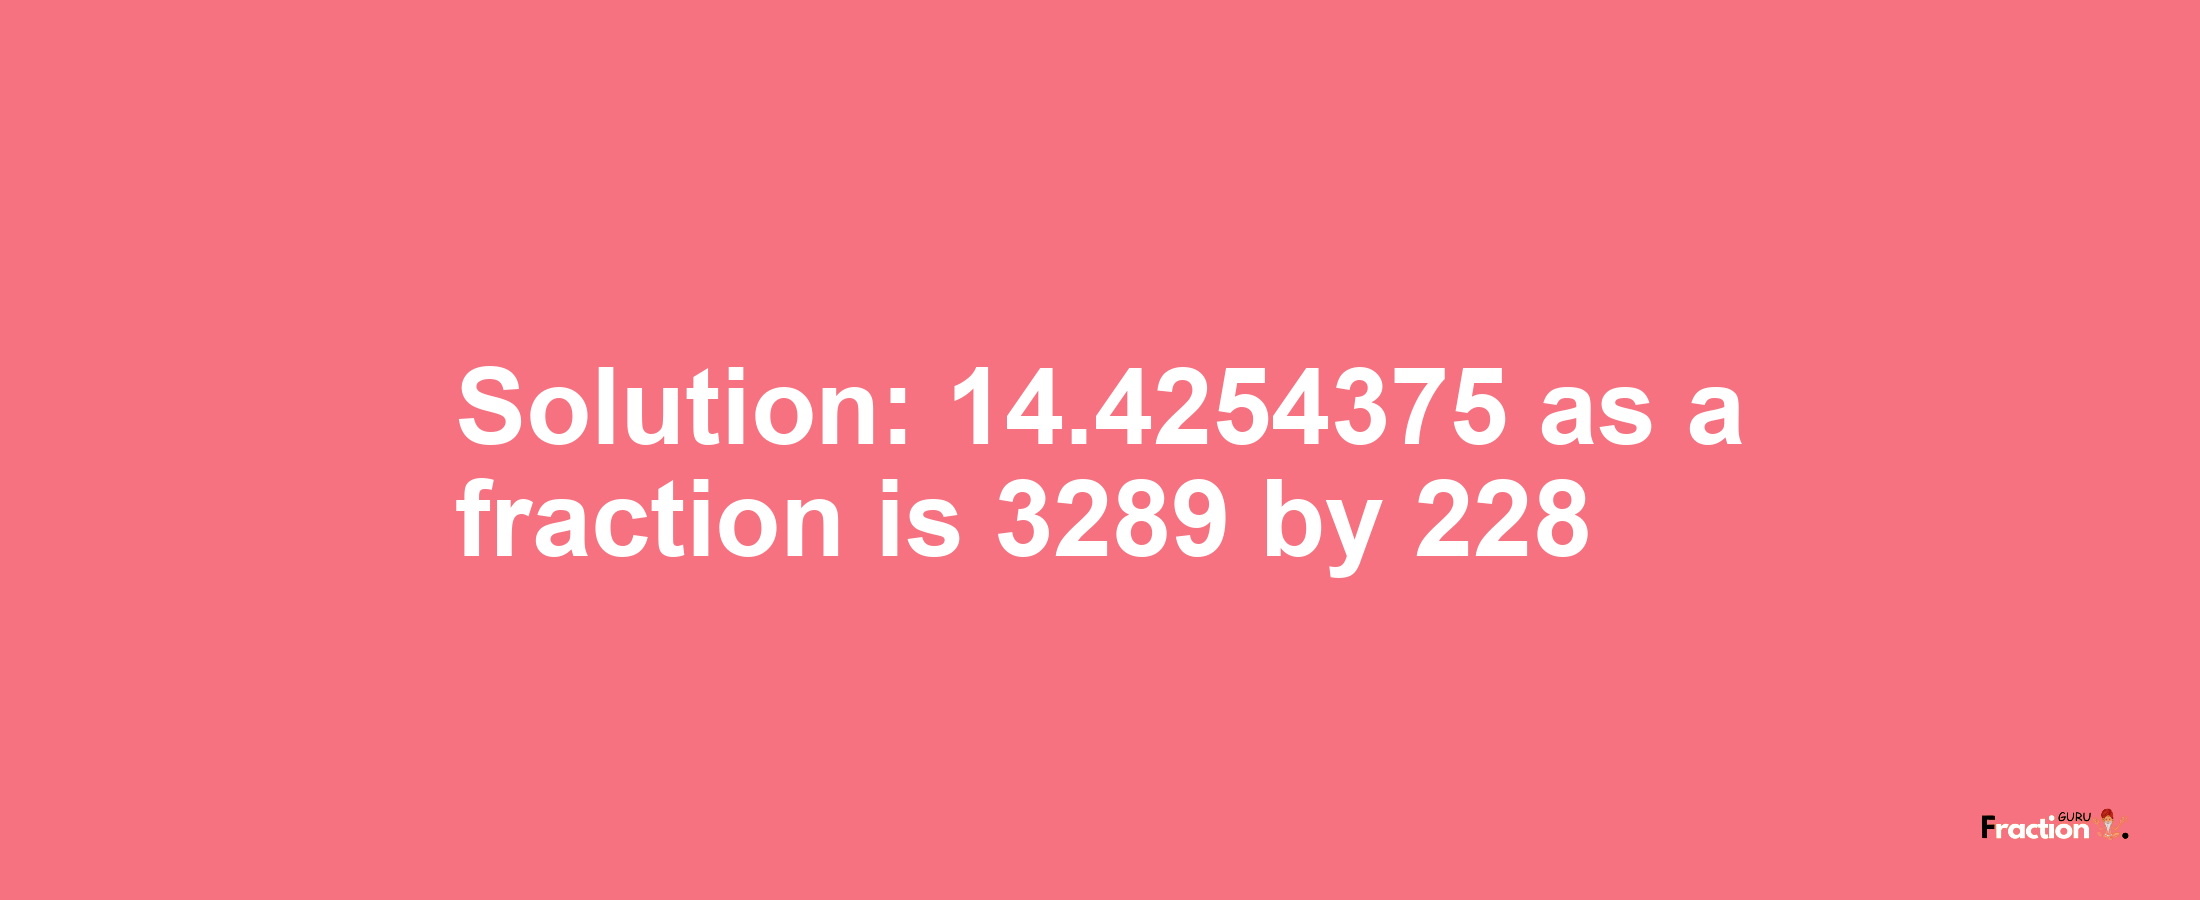 Solution:14.4254375 as a fraction is 3289/228